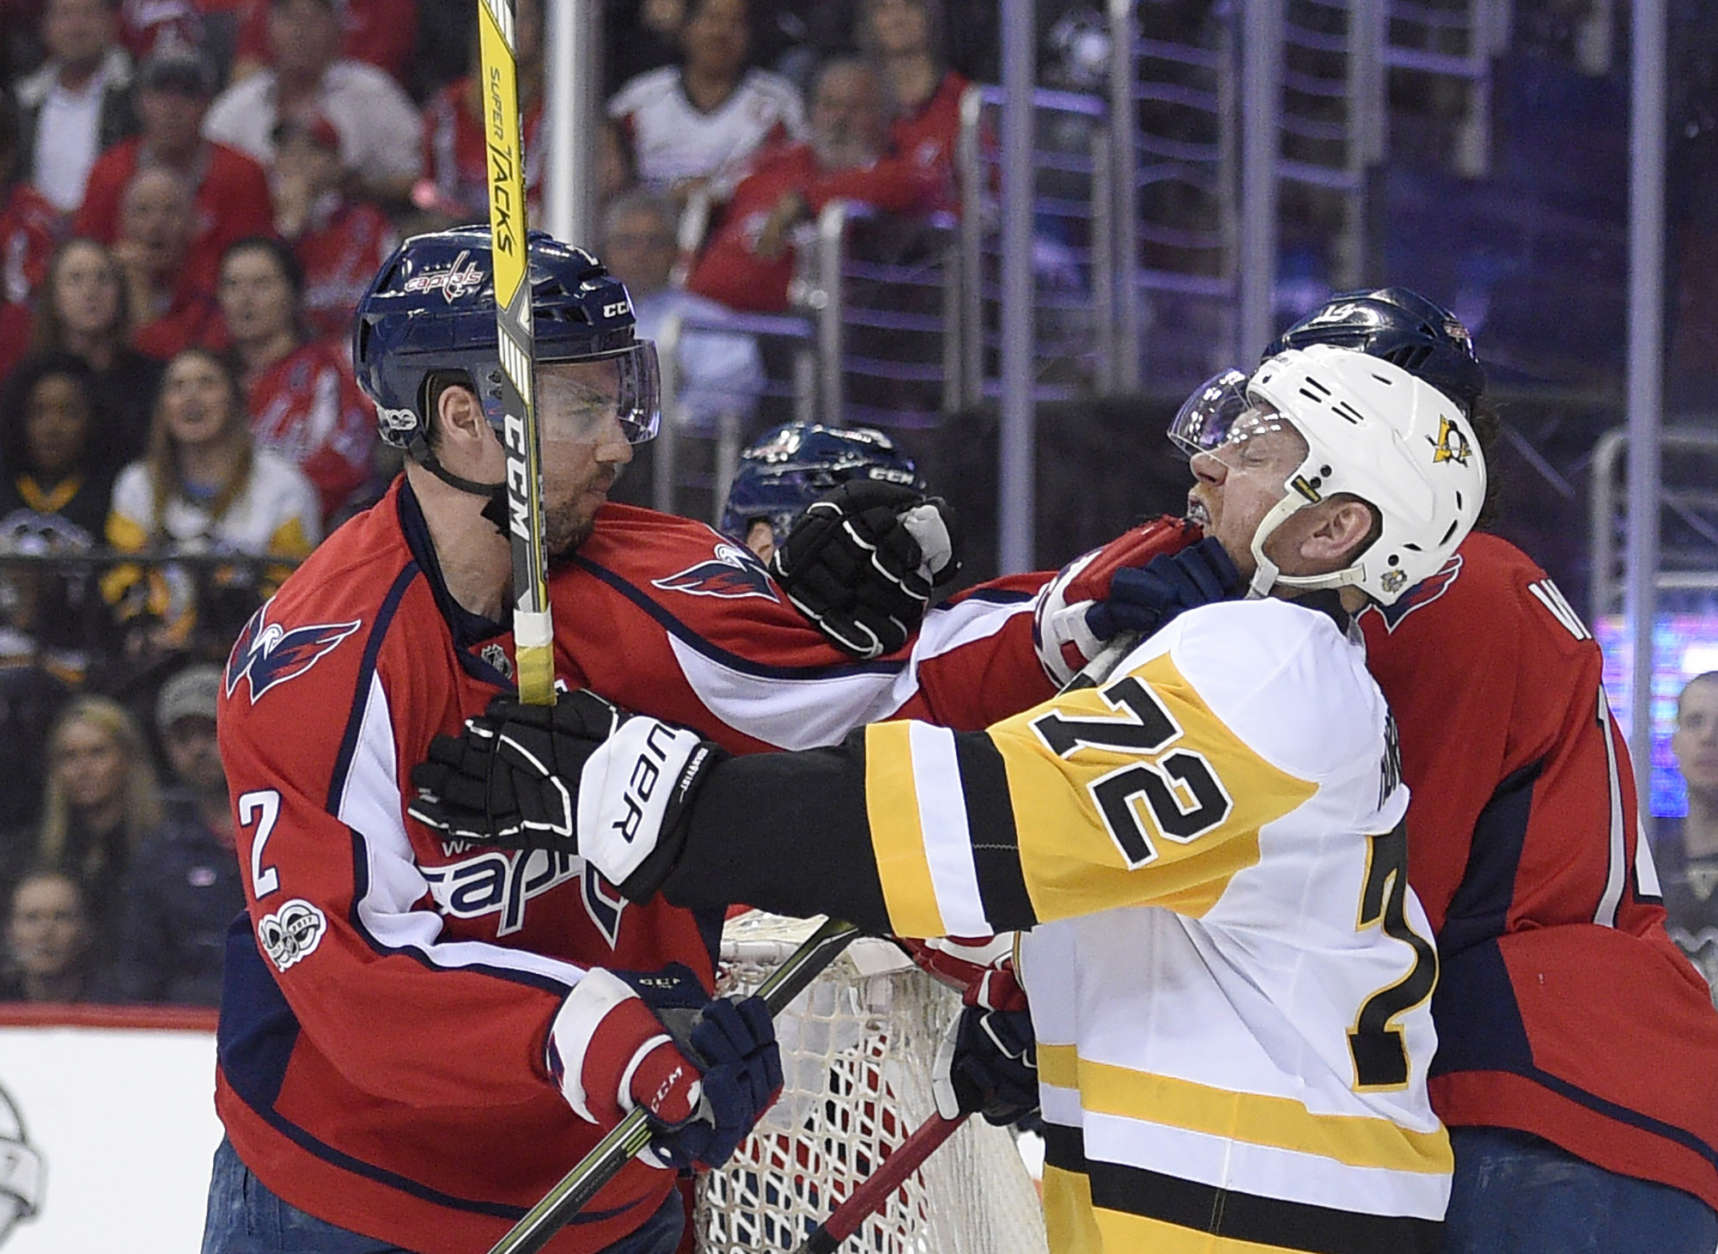 Washington Capitals defenseman Matt Niskanen (2) scuffles with Pittsburgh Penguins right wing Patric Hornqvist (72), of Sweden, during the first period of Game 1 in an NHL Stanley Cup hockey second-round playoff series, Thursday, April 27, 2017, in Washington. (AP Photo/Nick Wass)